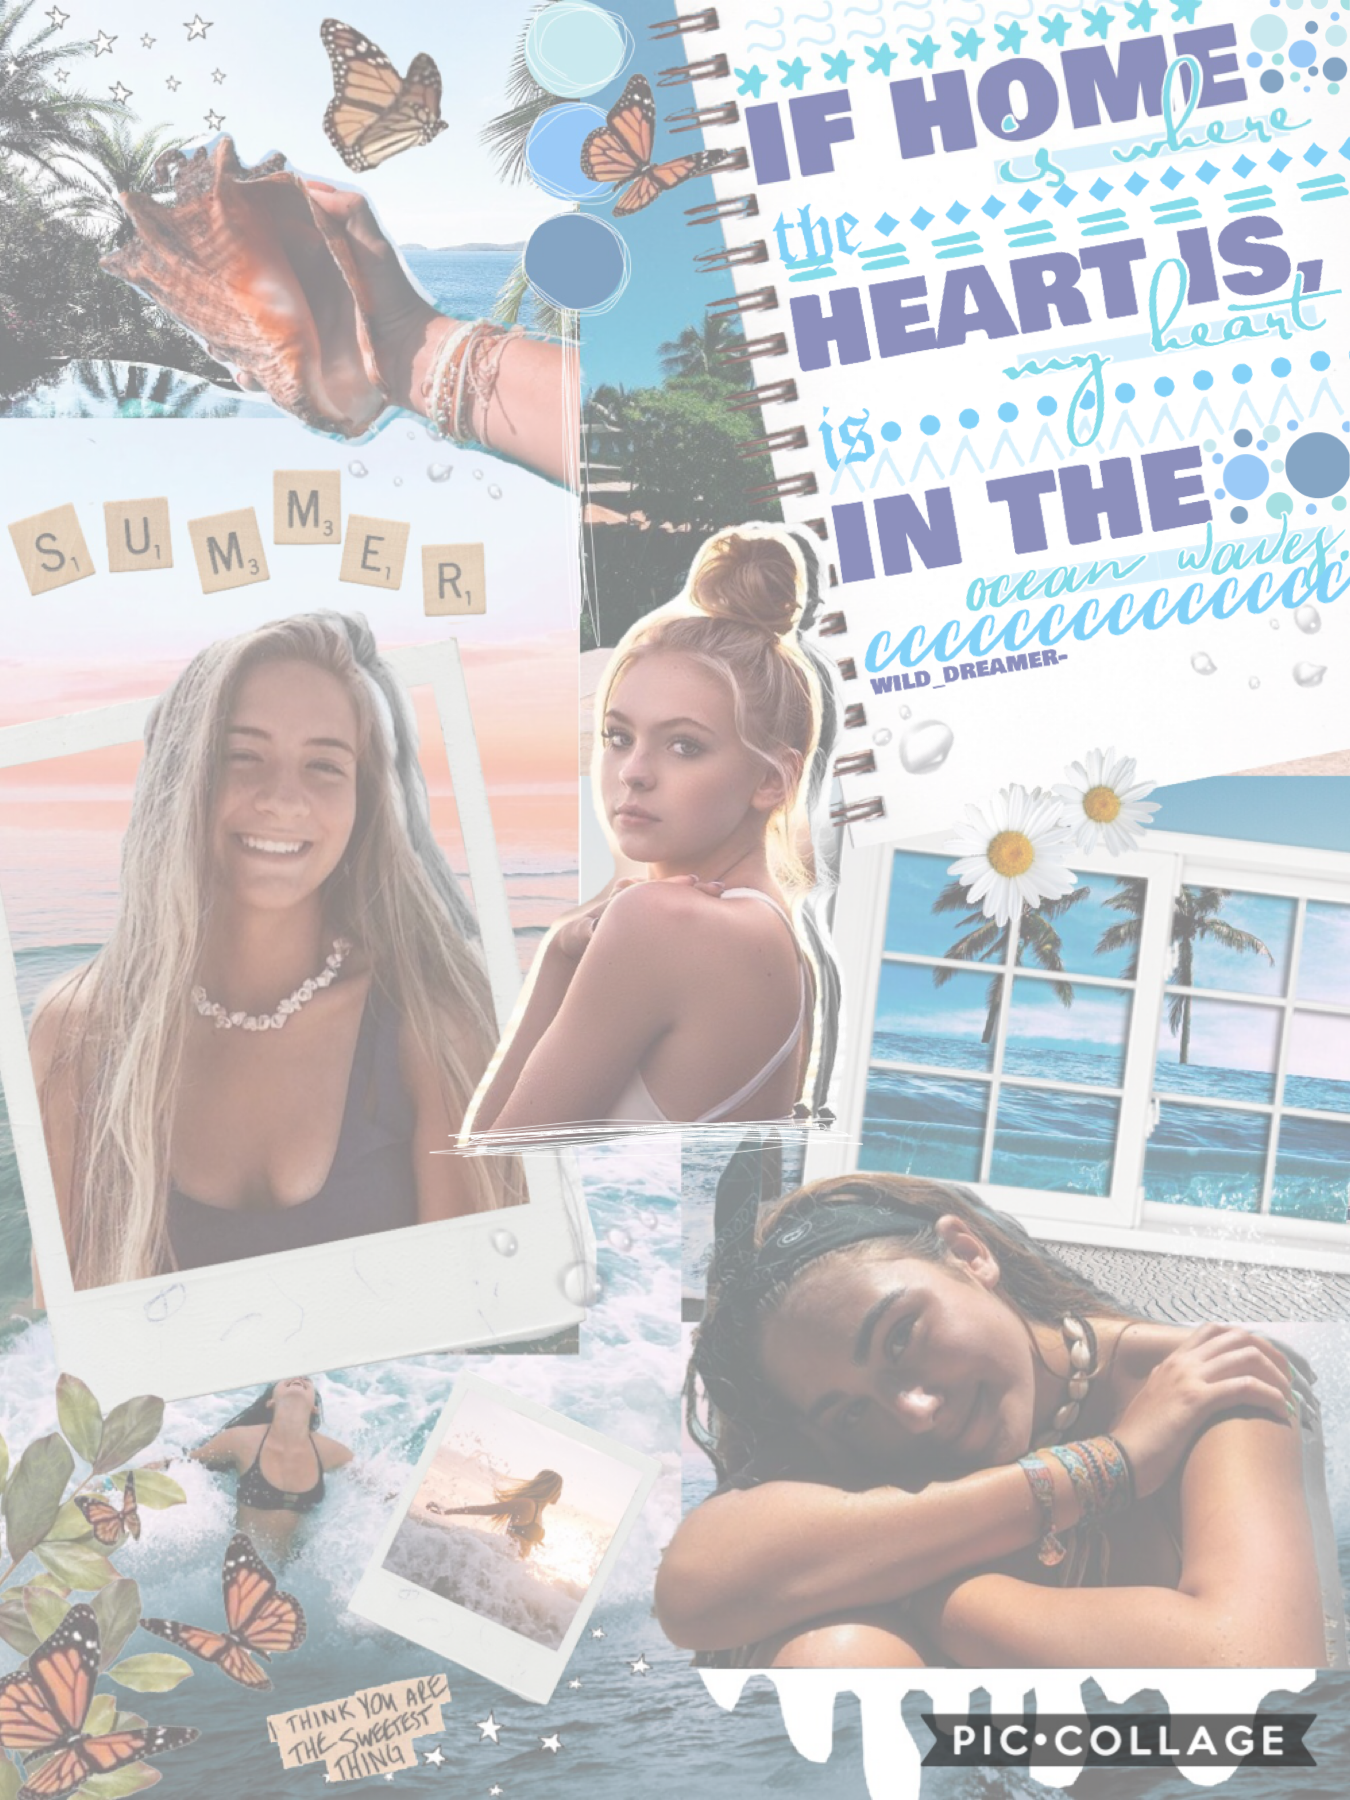    🌊t a p🌊
Heyy! This is a summer themed collage💫🥰 I made a extras! @wild_dreamer-extras-💗💗qotd. What’s your favourite emoji? AOTD. I have a few lol:💗🥰🌸🥺💫✨💞🦋💕😇☁️